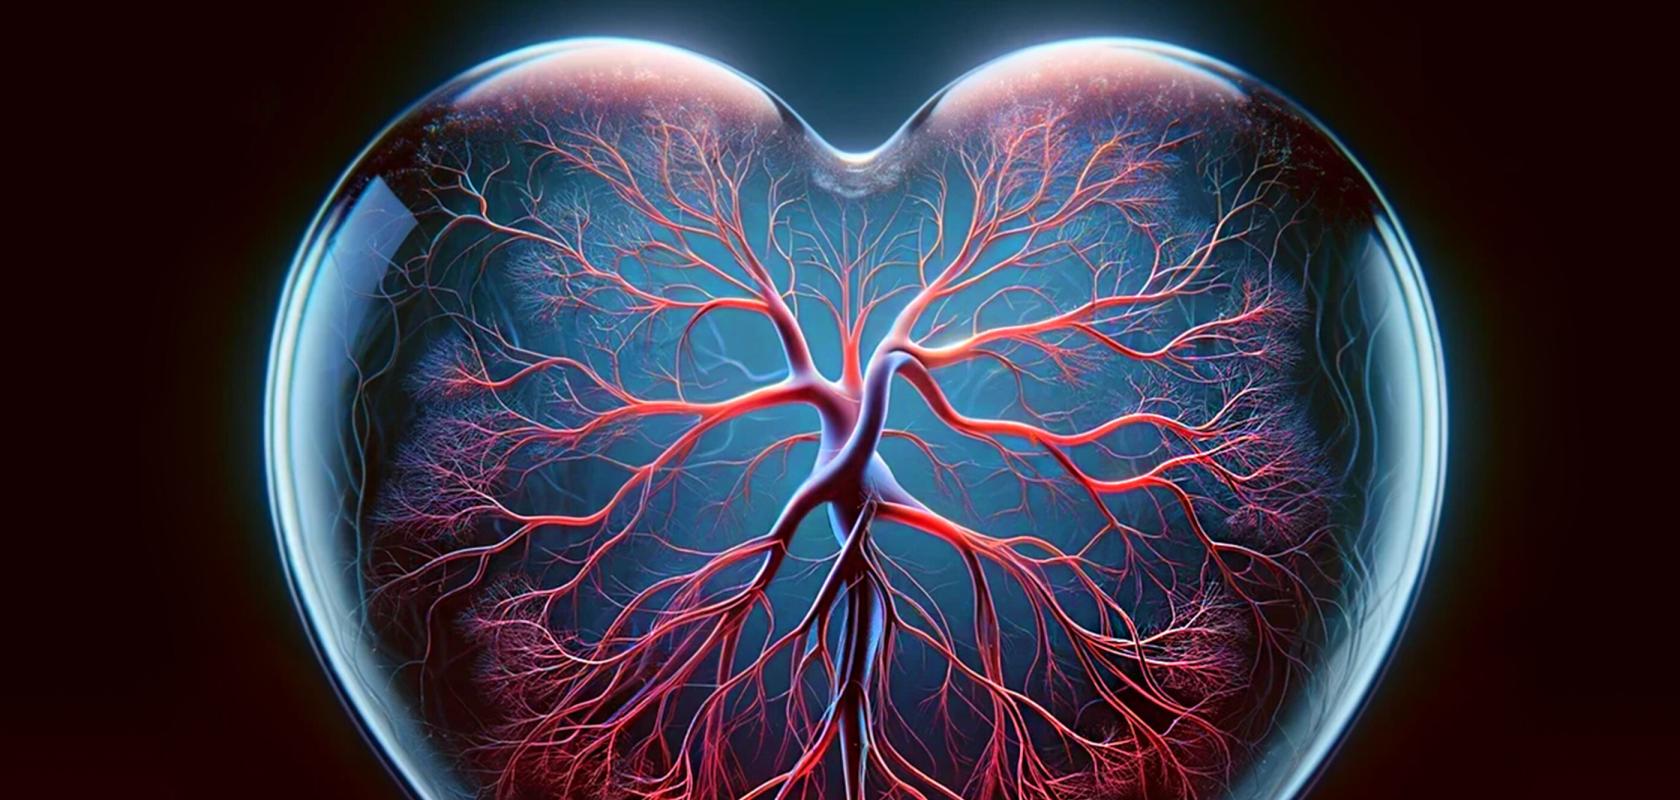 Imperial College London image microscopic heart vessels in super-resolution using new technique